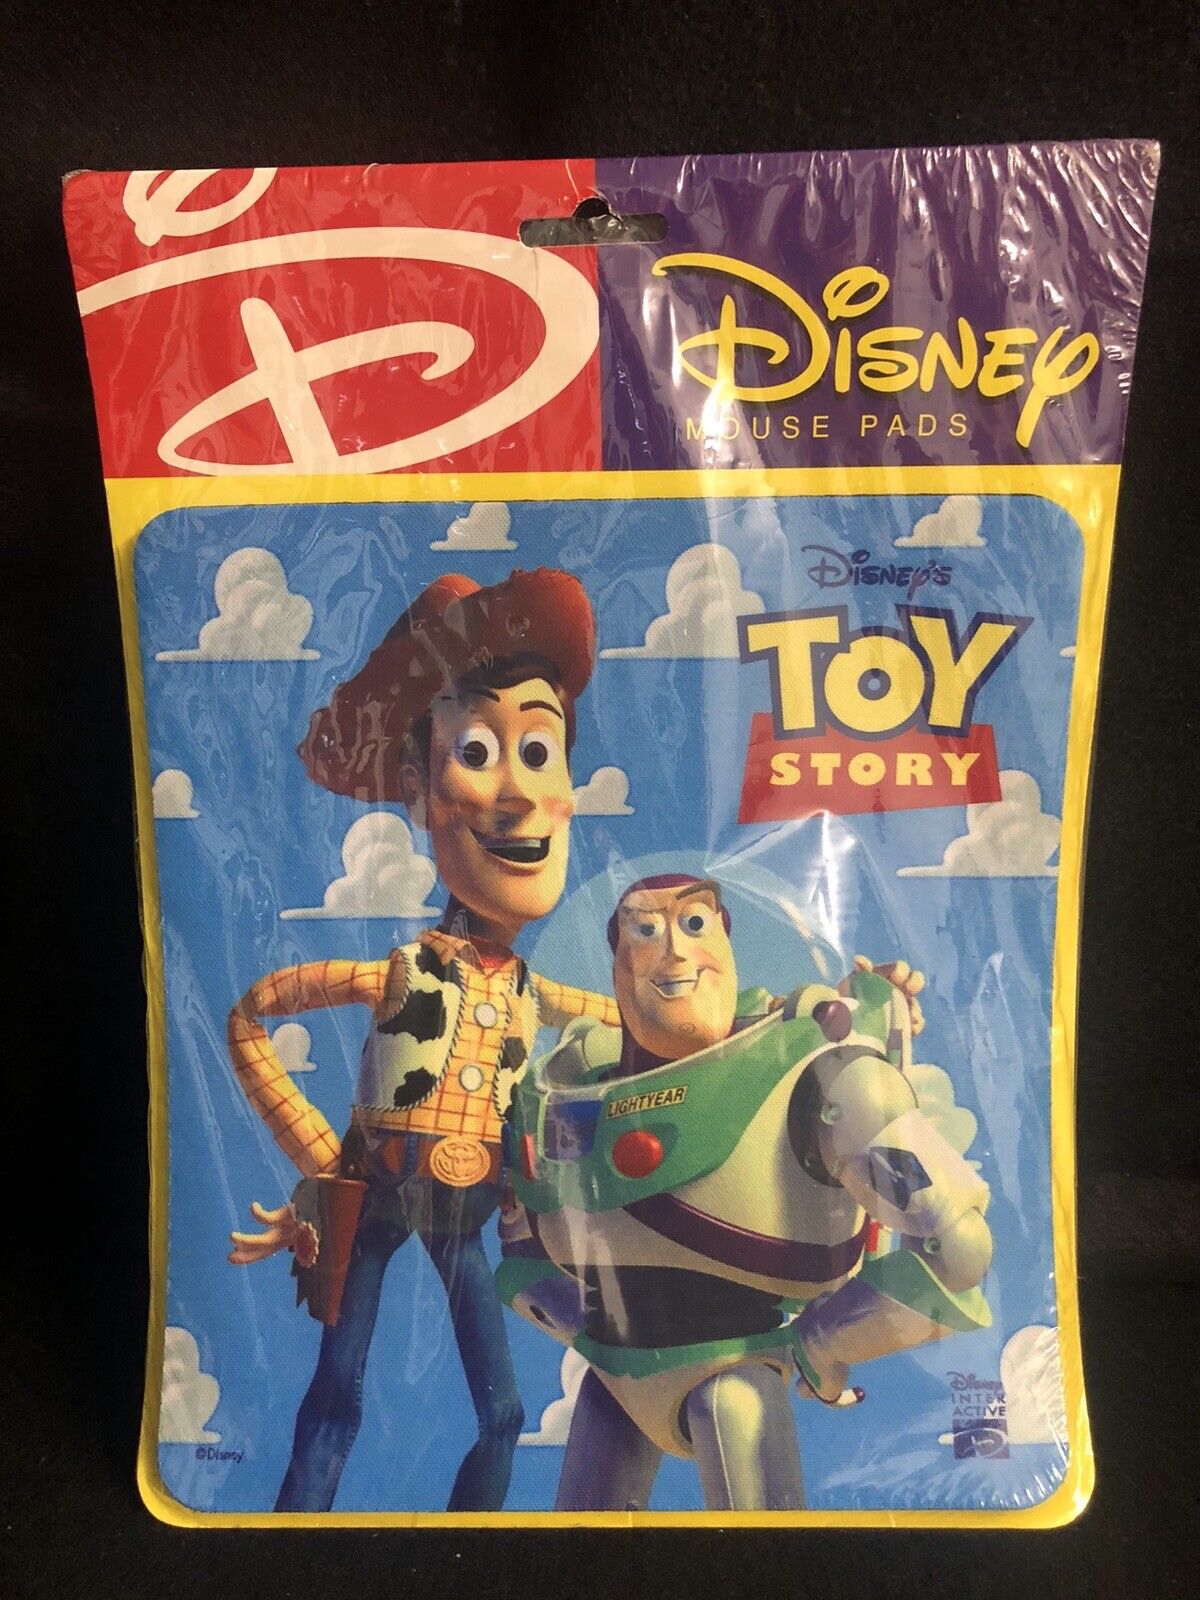 Disney Toy Story Woody & Buzz Mouse Pad New Sealed Vintage 1997 Original